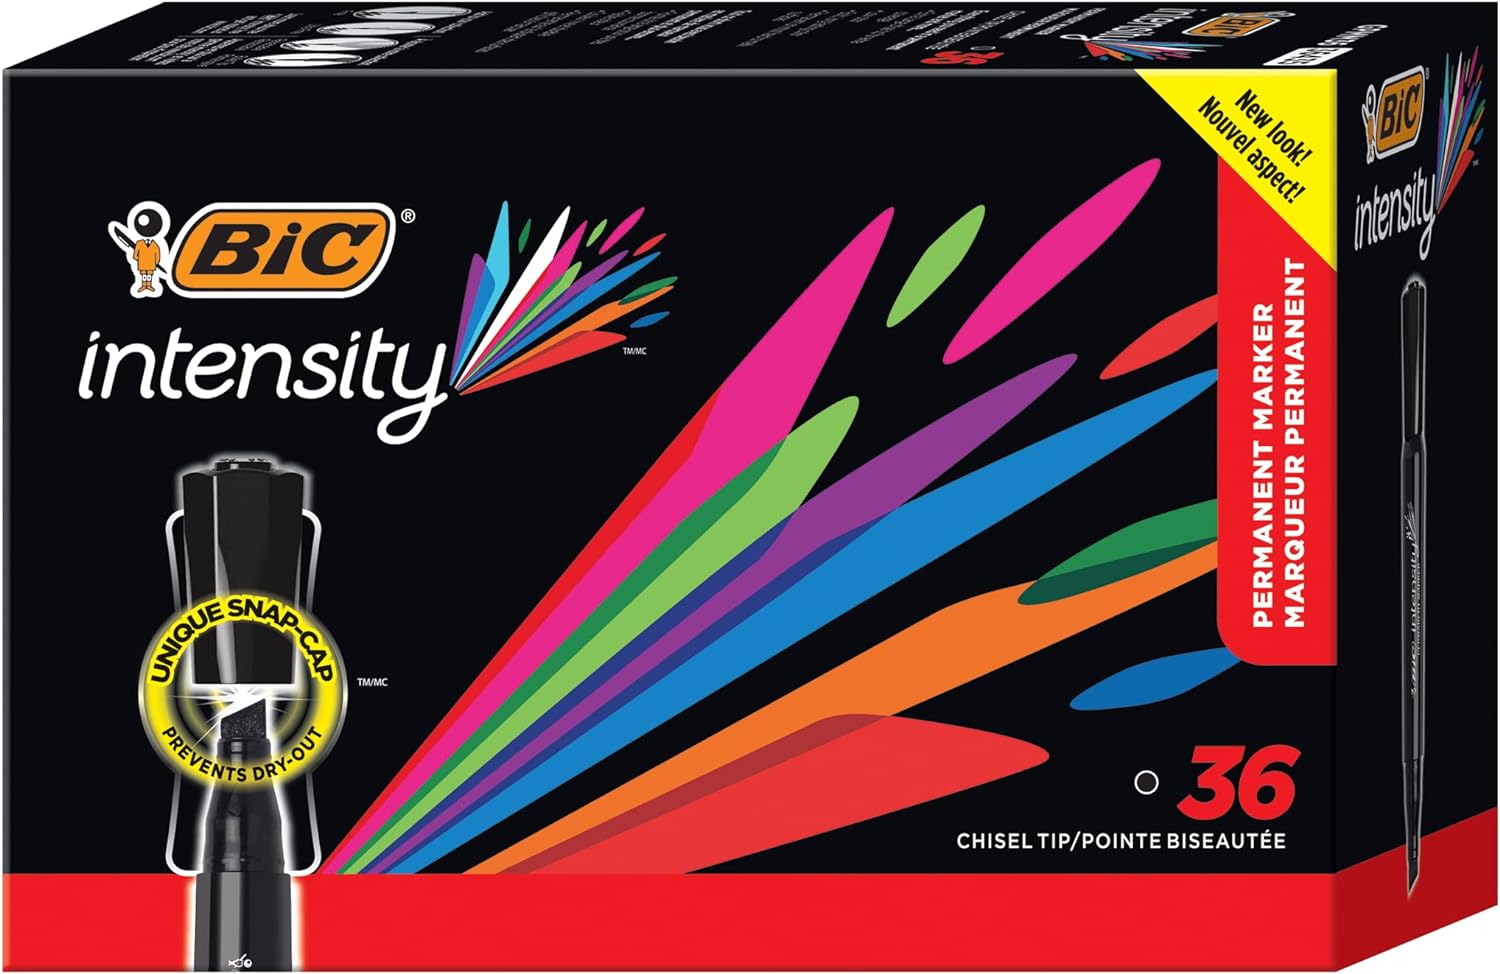 BIC Intensity Permanent Marker, Tank style, Chisel Tip - Box of 36 Black Markers (GPMM36-BLK)